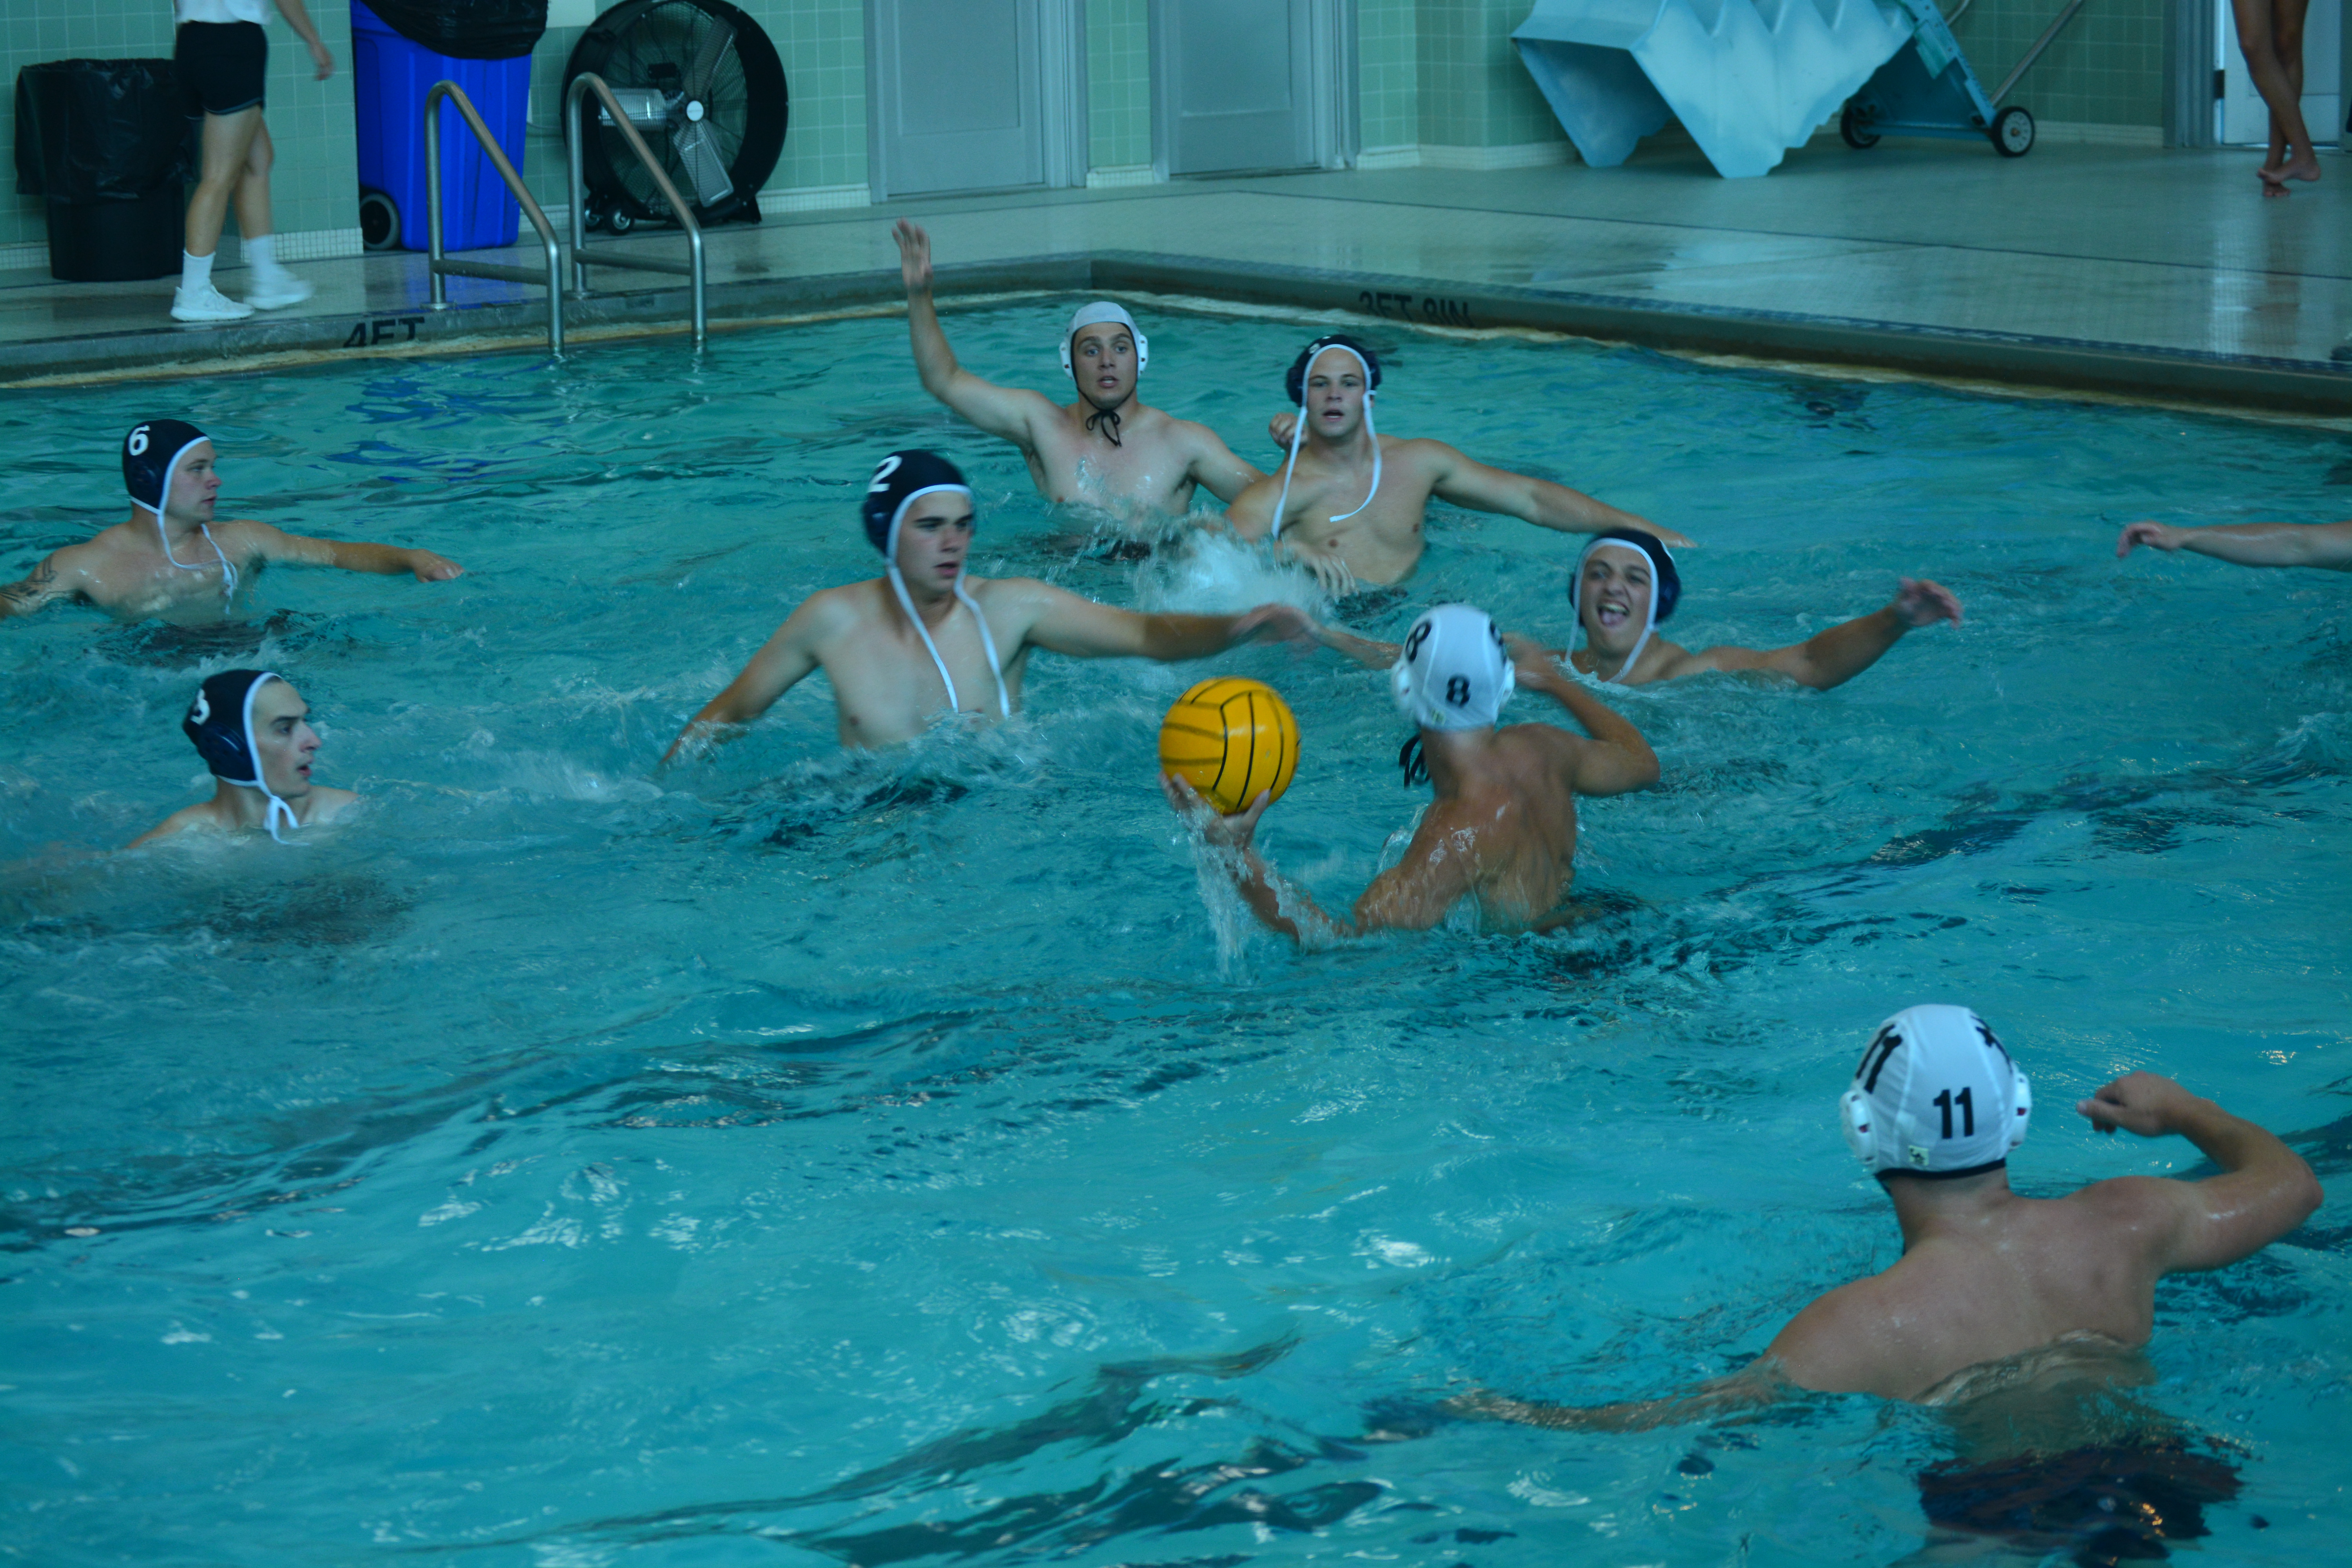 More water polo